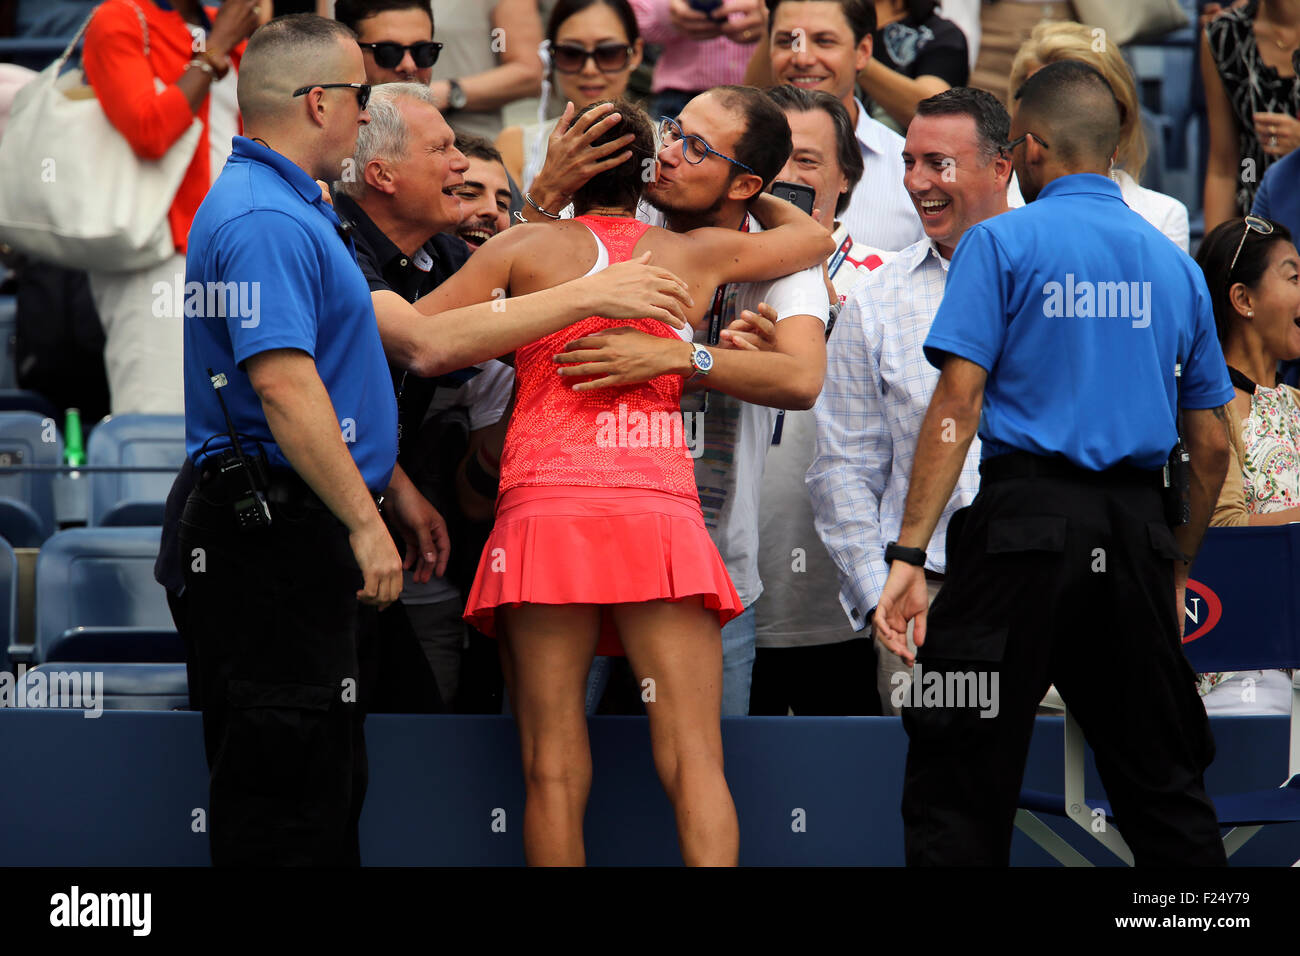 Flushing Meadows, New York, USA. 11th Sep, 2015. Roberta Vinci of Italy gets some hugs from supporters after defeating Serena Williams in their semifinal match at the U.S. Open in Flushing Meadows, New York on the afternoon of September 11th, 2015.  Vinci won the match 2-6, 6-4, 6-4. Credit:  Adam Stoltman/Alamy Live News Stock Photo